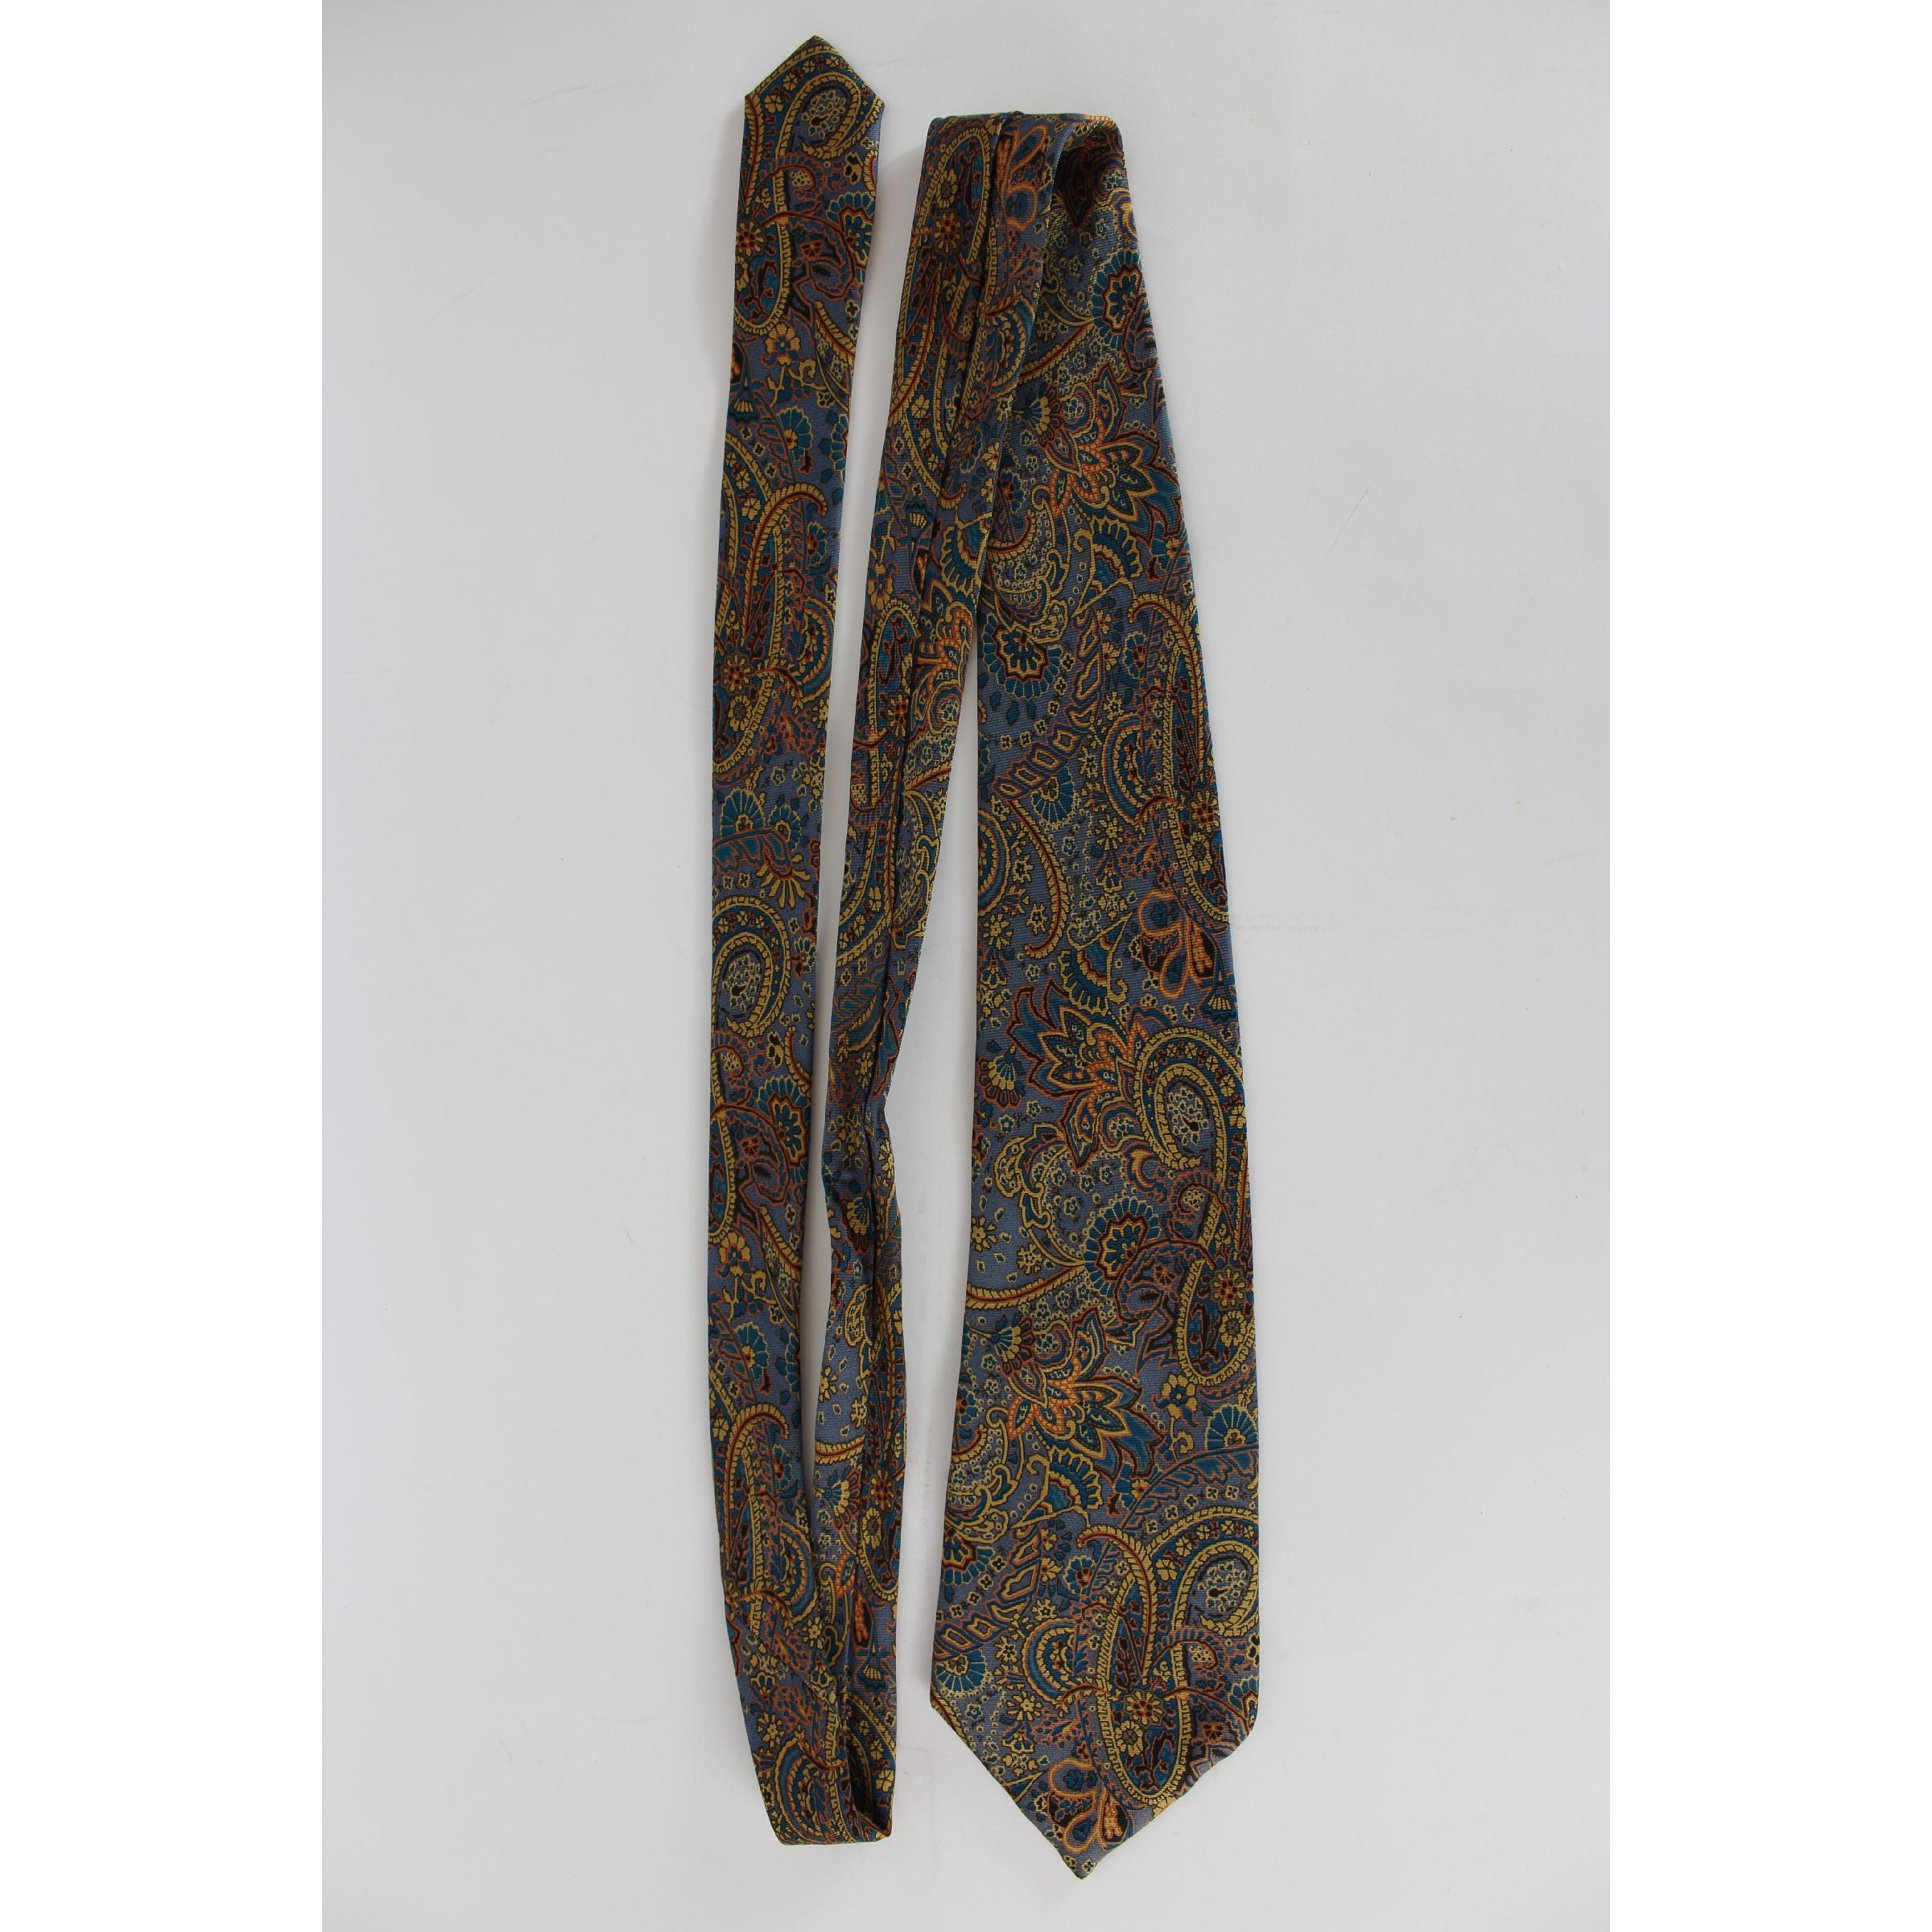 Gucci vintage tie, blue and brown with paisley designs, 100% silk. 1980s. Made in Italy. Excellent vintage conditions.

Length: 154 cm
Width: 9 cm